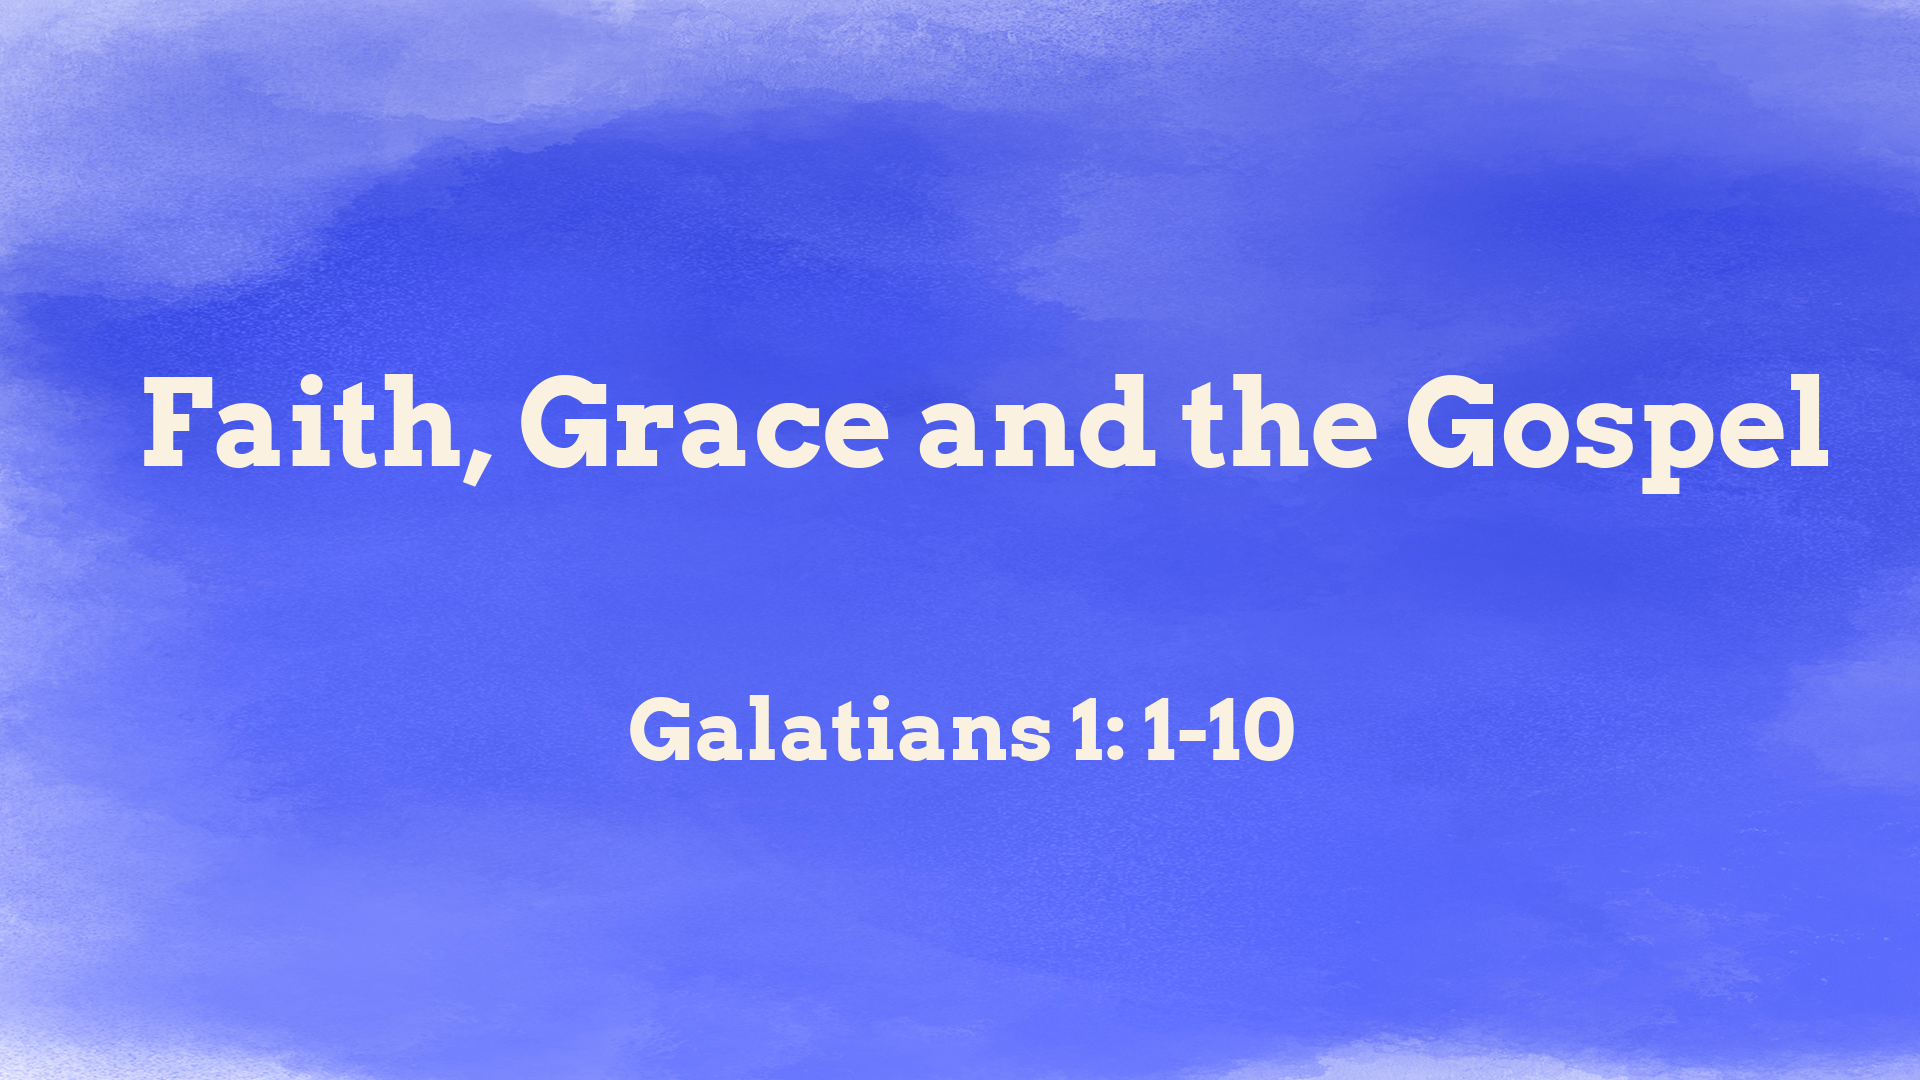 Aug 29, 2021 - Faith, Grace and the Gospel (Video) - Galatians 1: 1-10 -  English Ministry | Vancouver Chinese Alliance Church